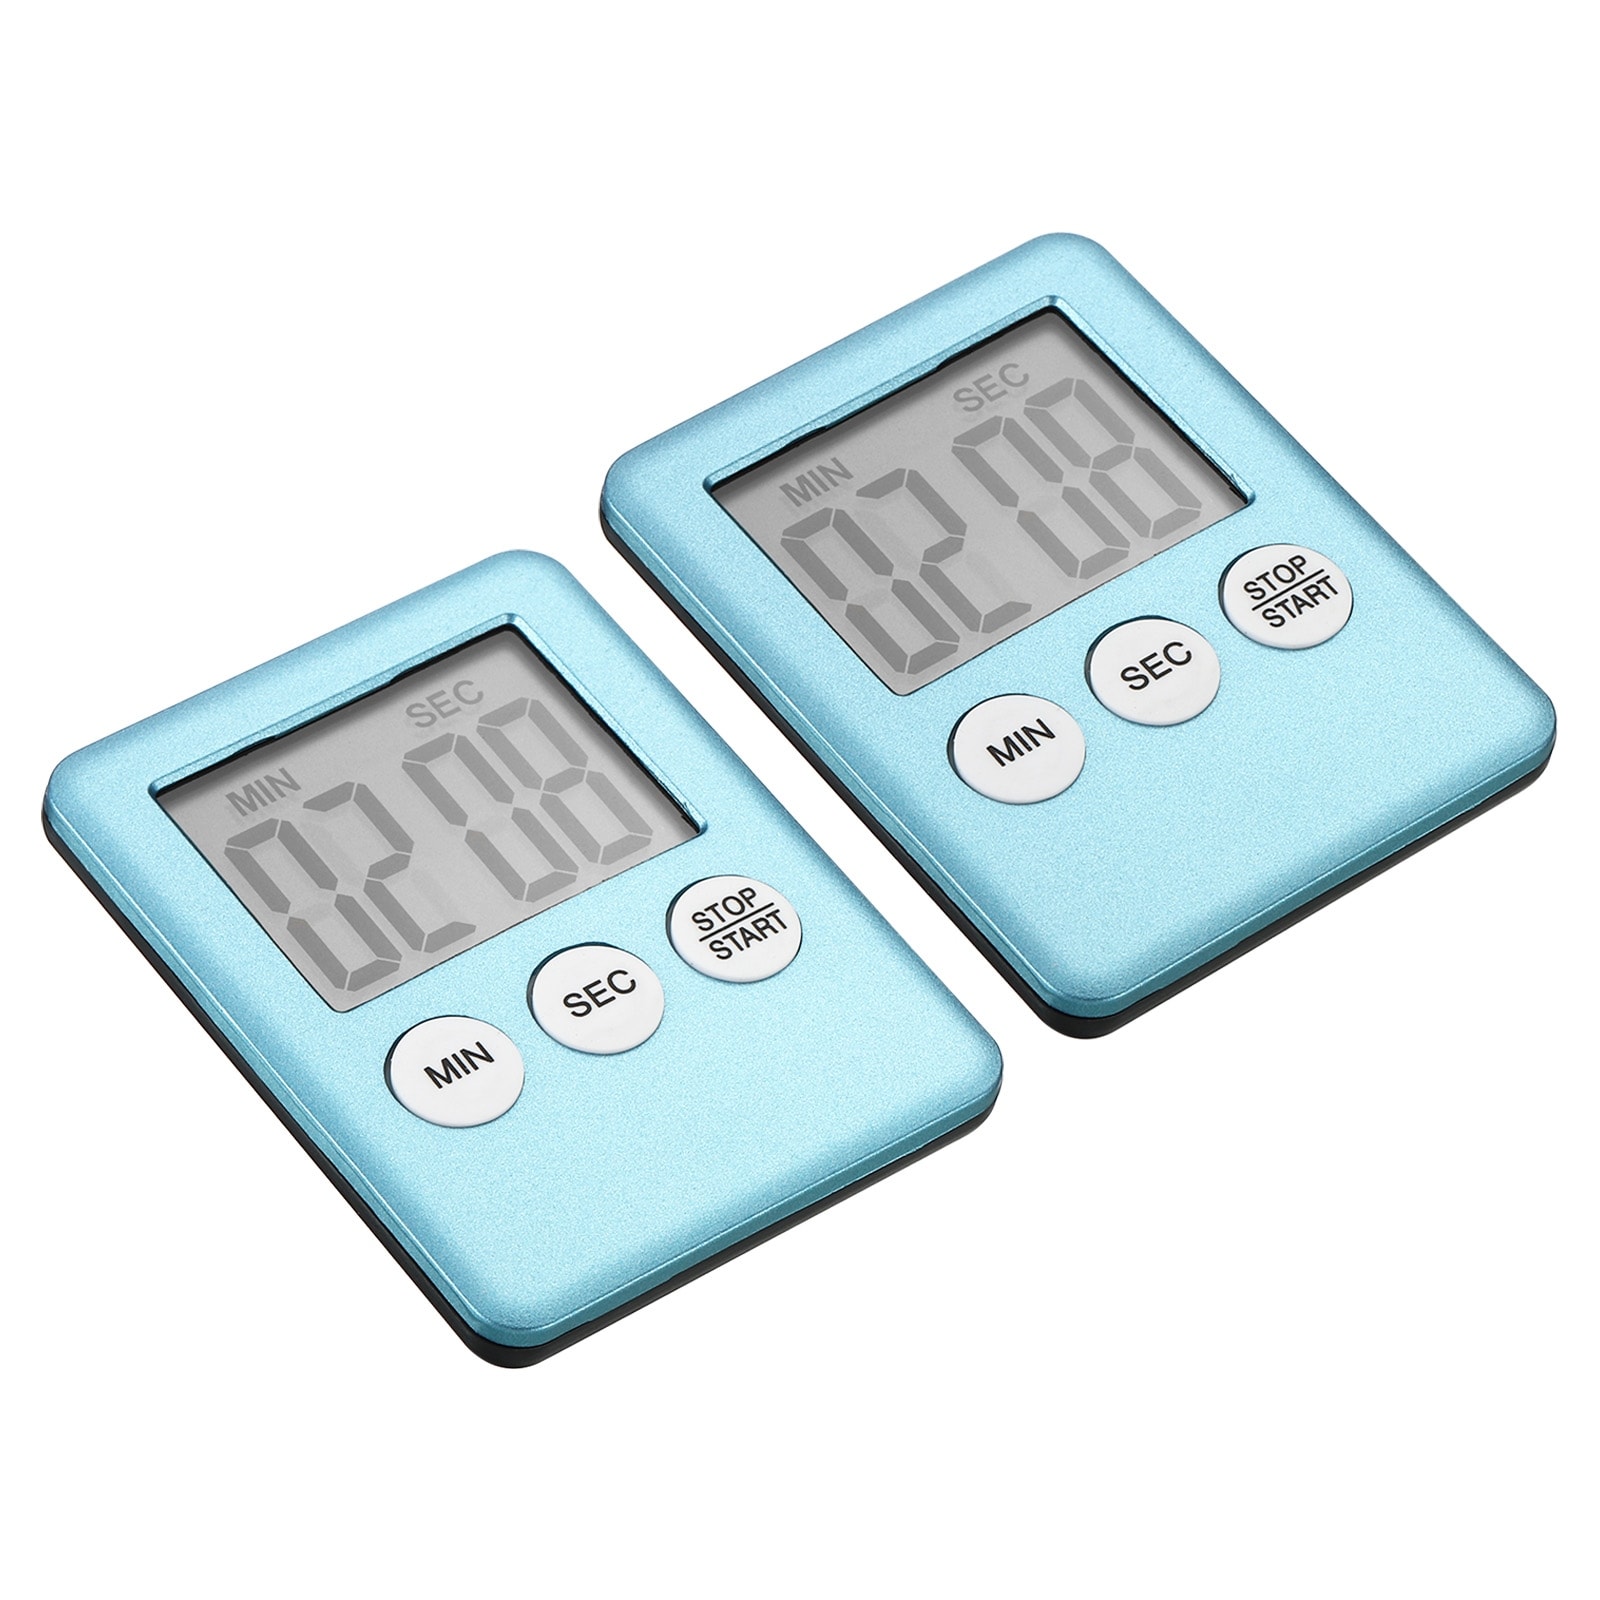 https://ak1.ostkcdn.com/images/products/is/images/direct/3ebf918a429a5db39bb67abc09ba983c89a82665/Digital-Timer%2C2Pcs-Small-Count-Down-UP-Clock-w-Magnetic%2CKitchen-Timer-Light-Blue.jpg